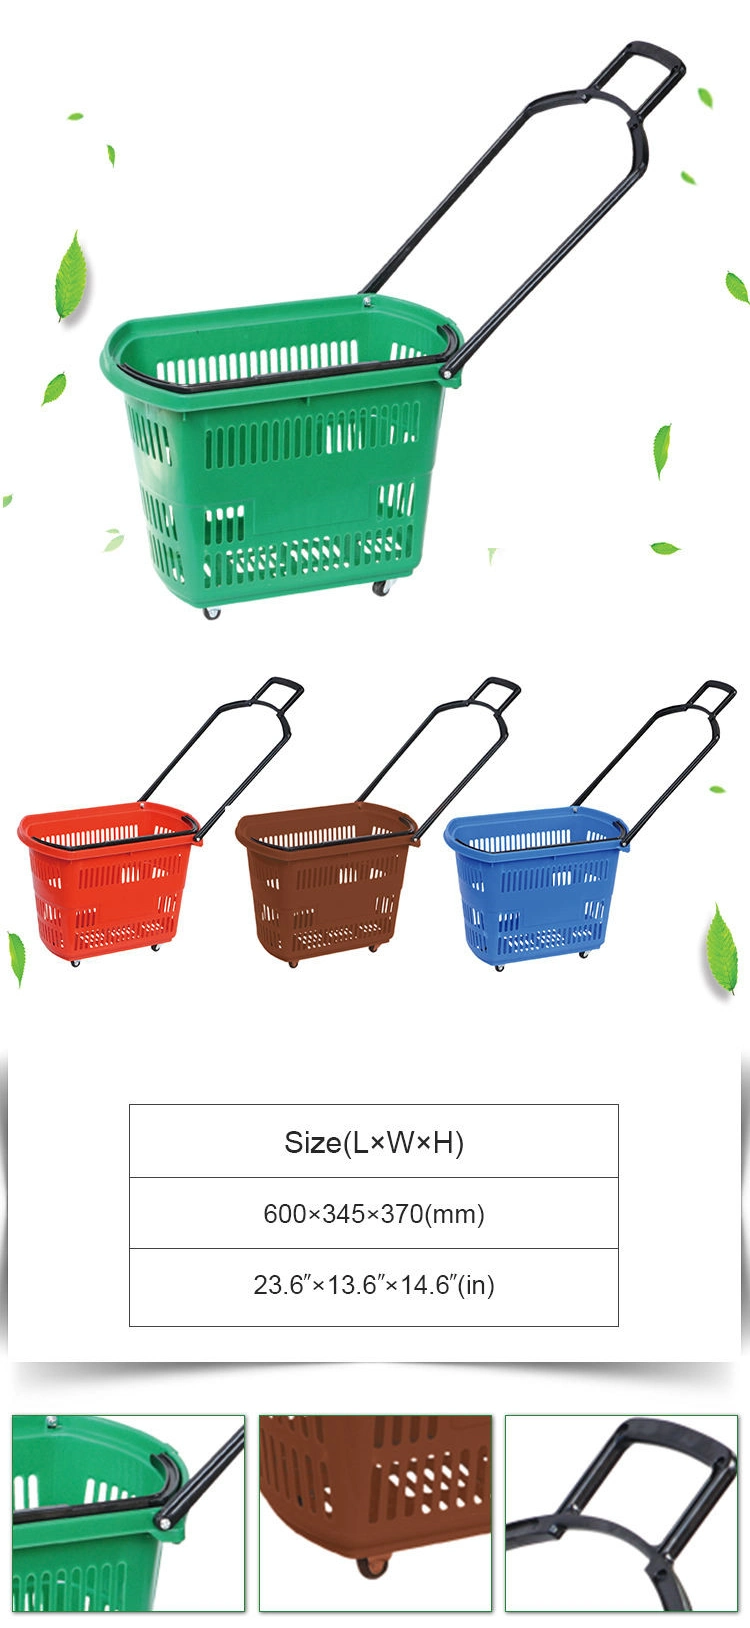 Wholesale Retail Grocery Supermarket Plastic Hand Held Storage Shopping Baskets for Sale